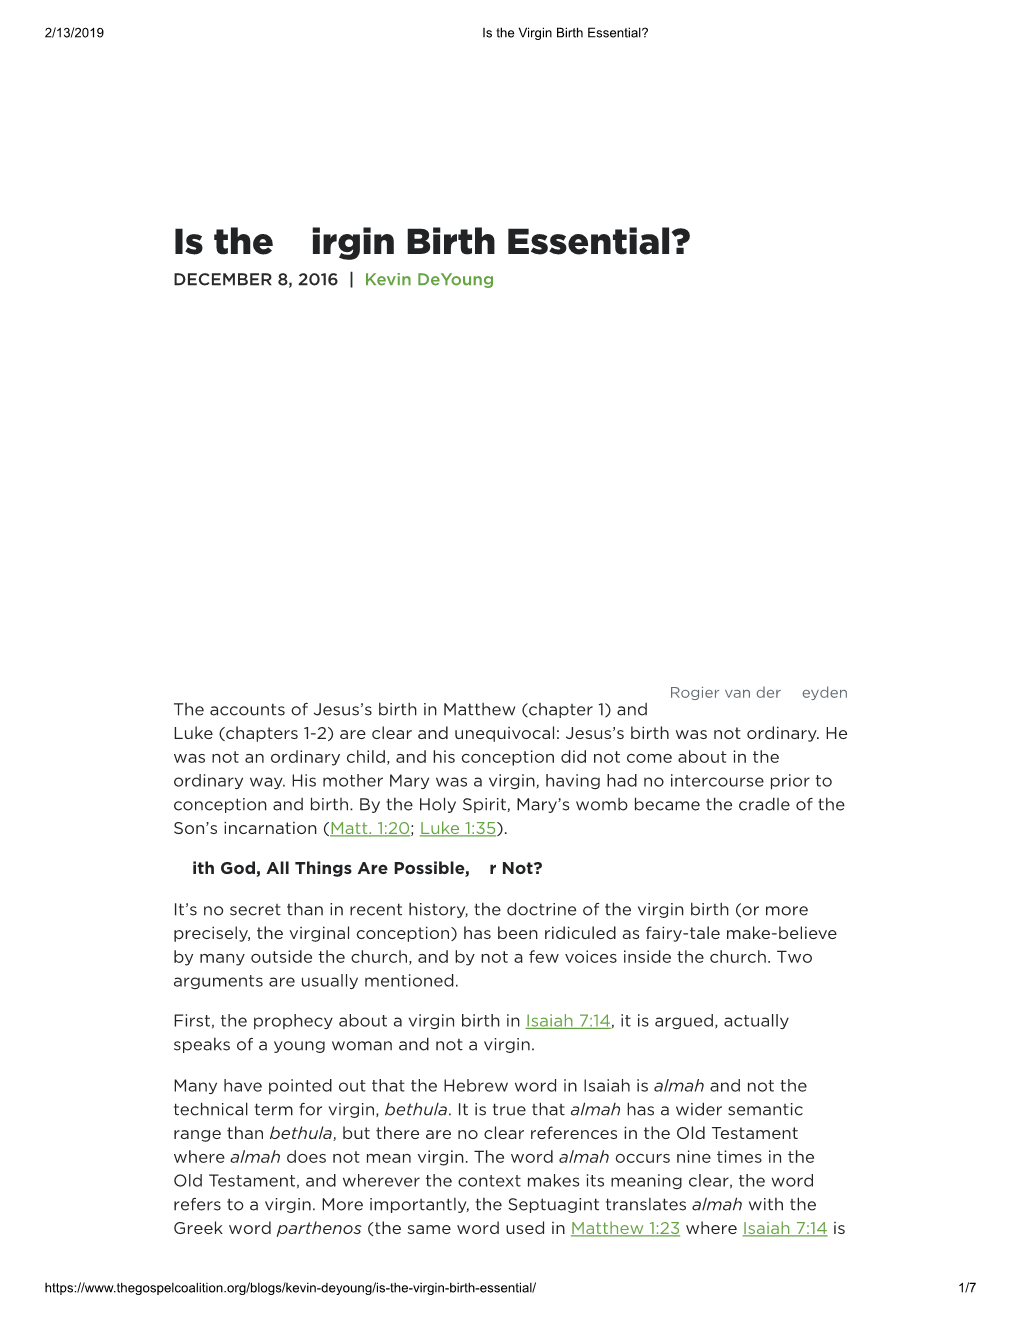 Is the Virgin Birth Essential?